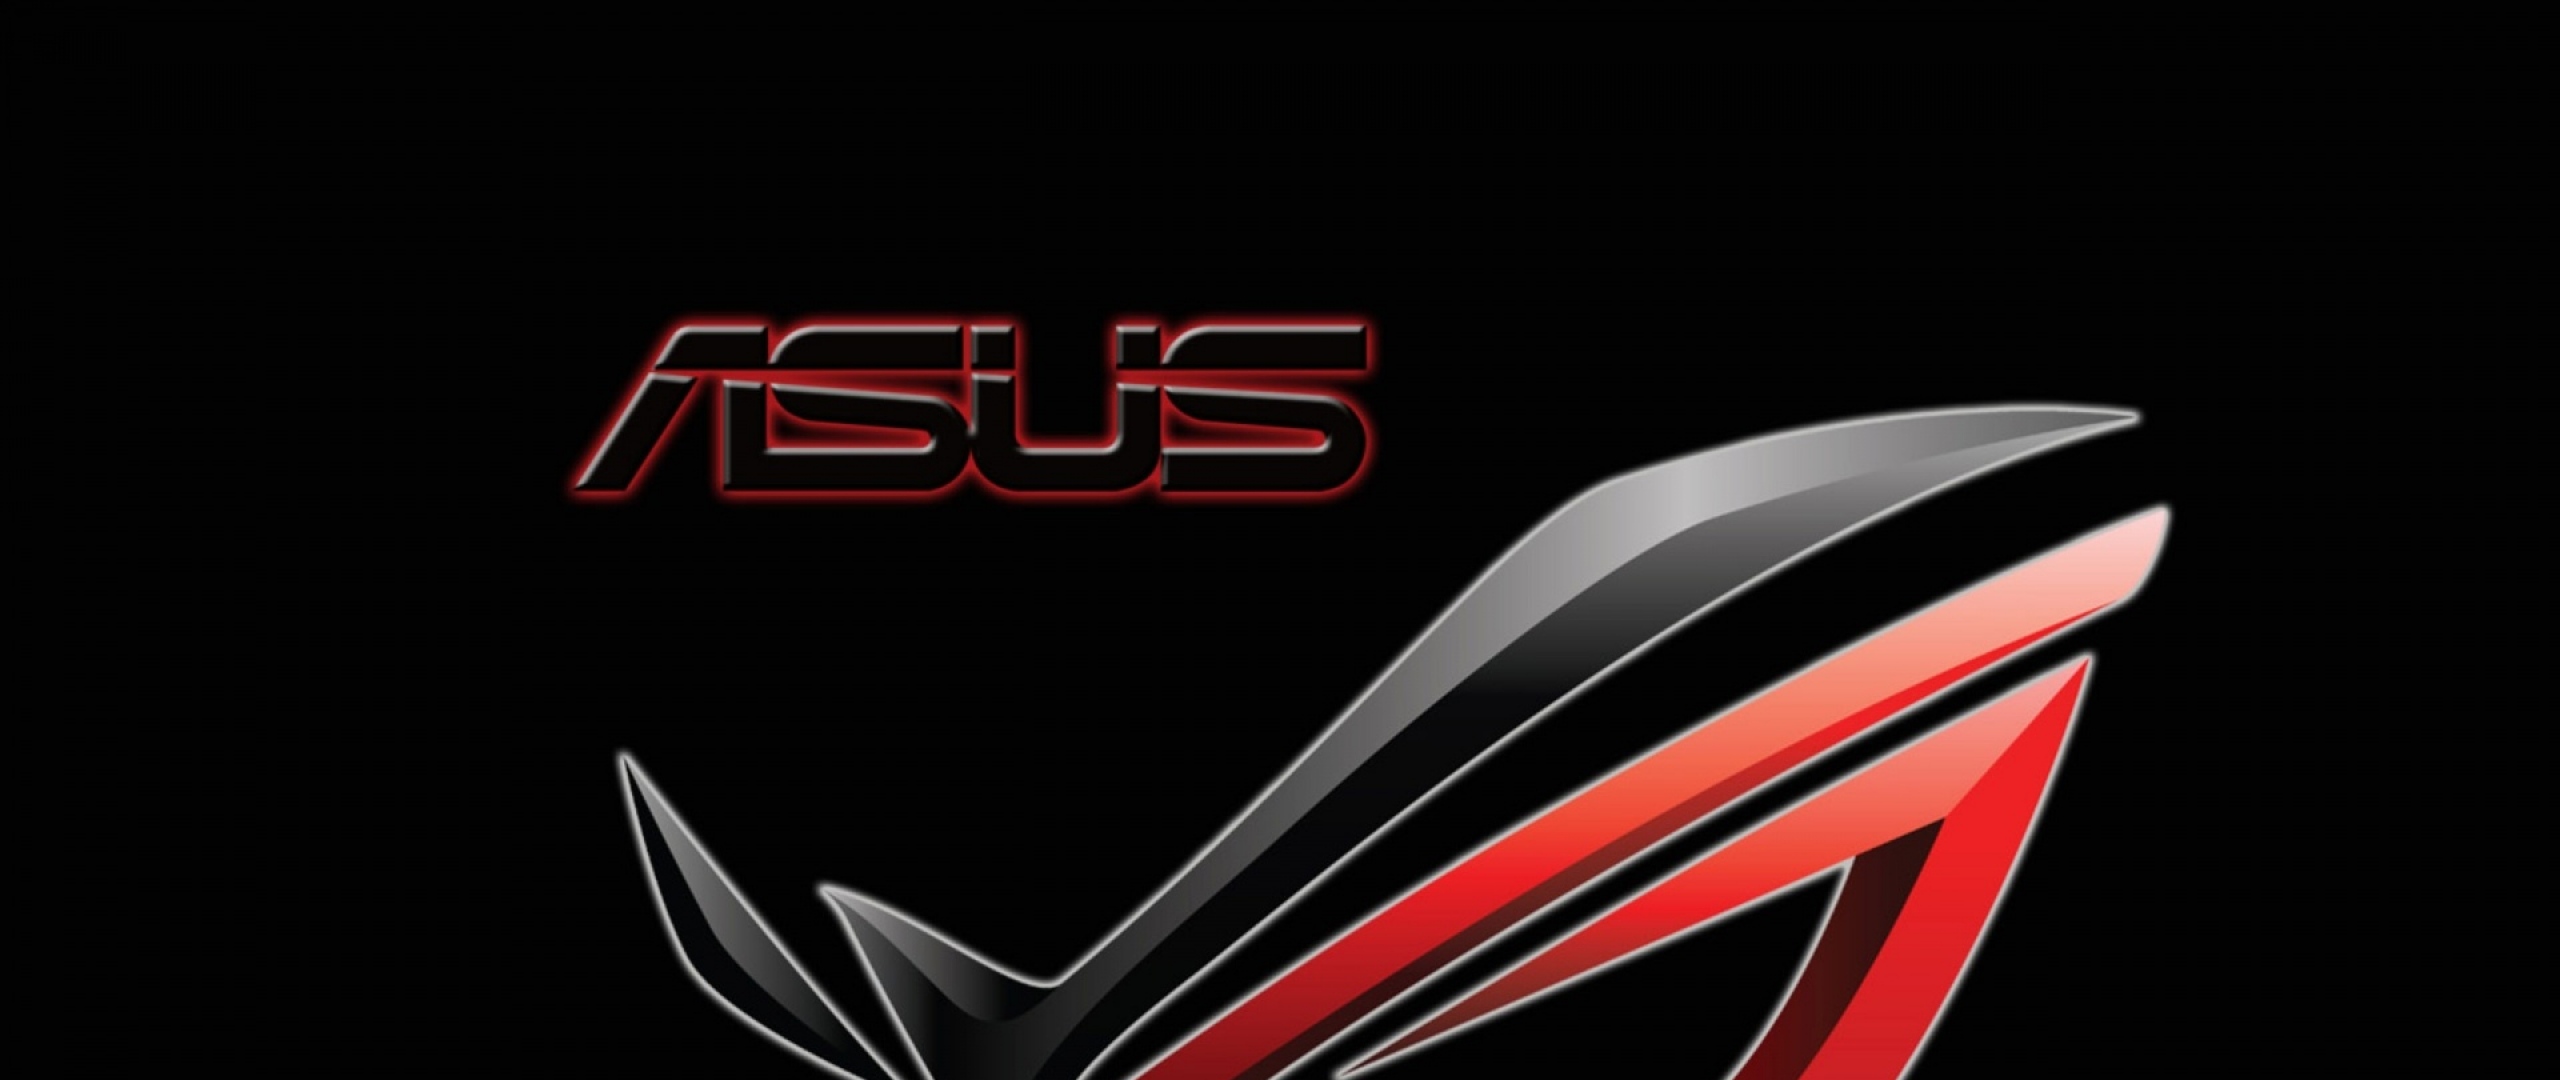 Wallpaper Asus Pany Logo Text Bw Pictures